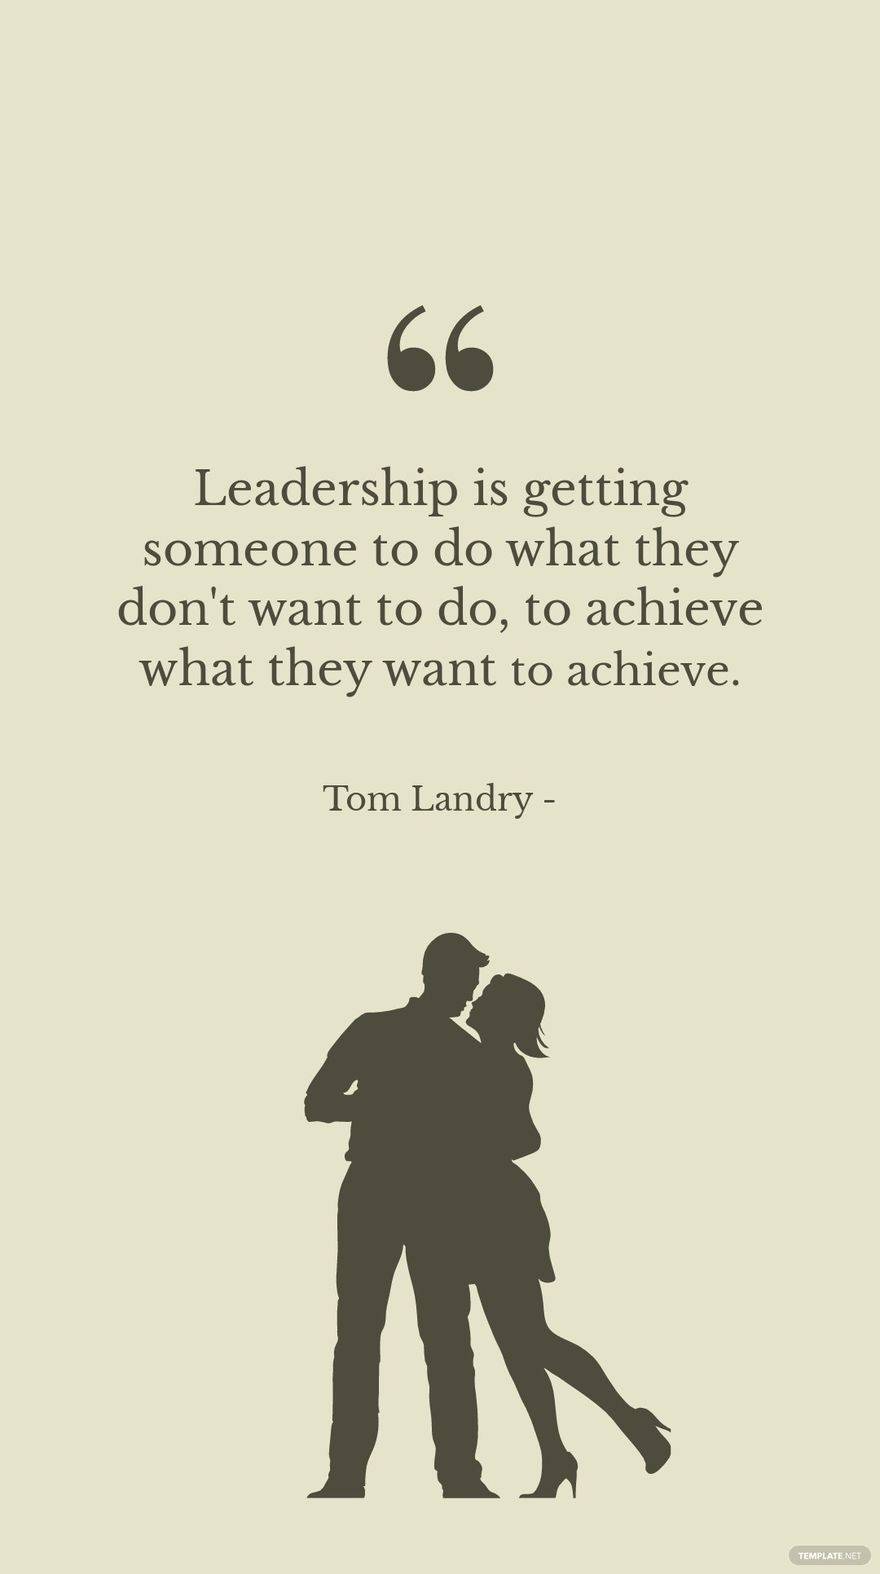 Tom Landry - Leadership is getting someone to do what they don't want to do, to achieve what they want to achieve.